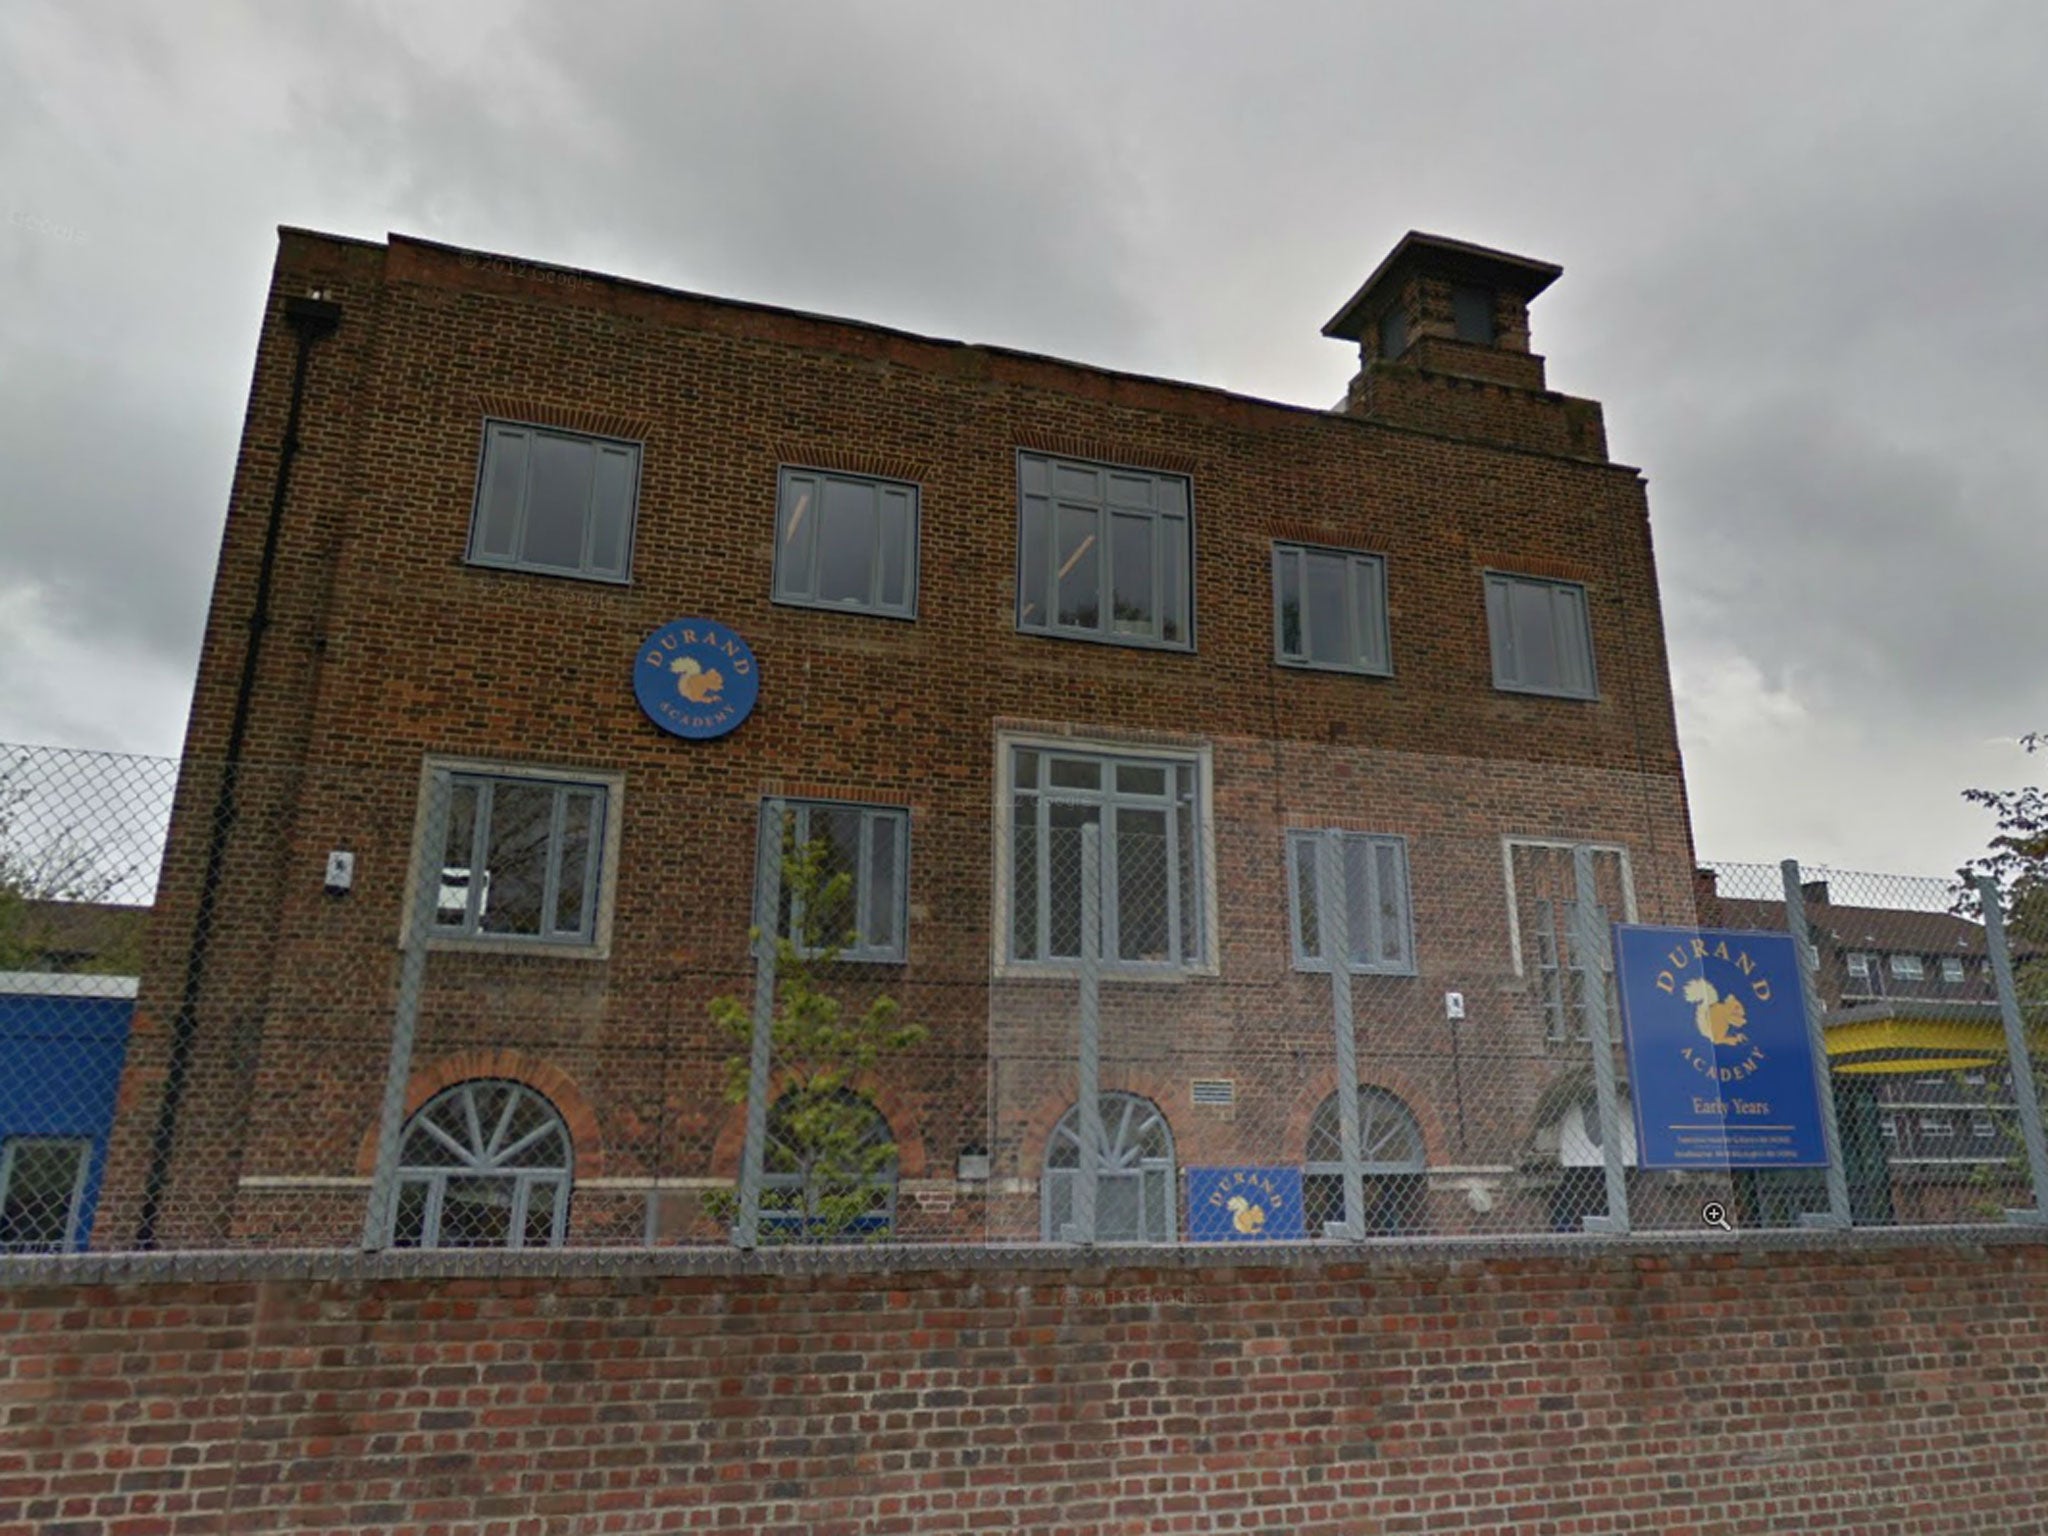 The Durand Academy in Stockwell, south London is one of the 4,400 academies under scrutiny